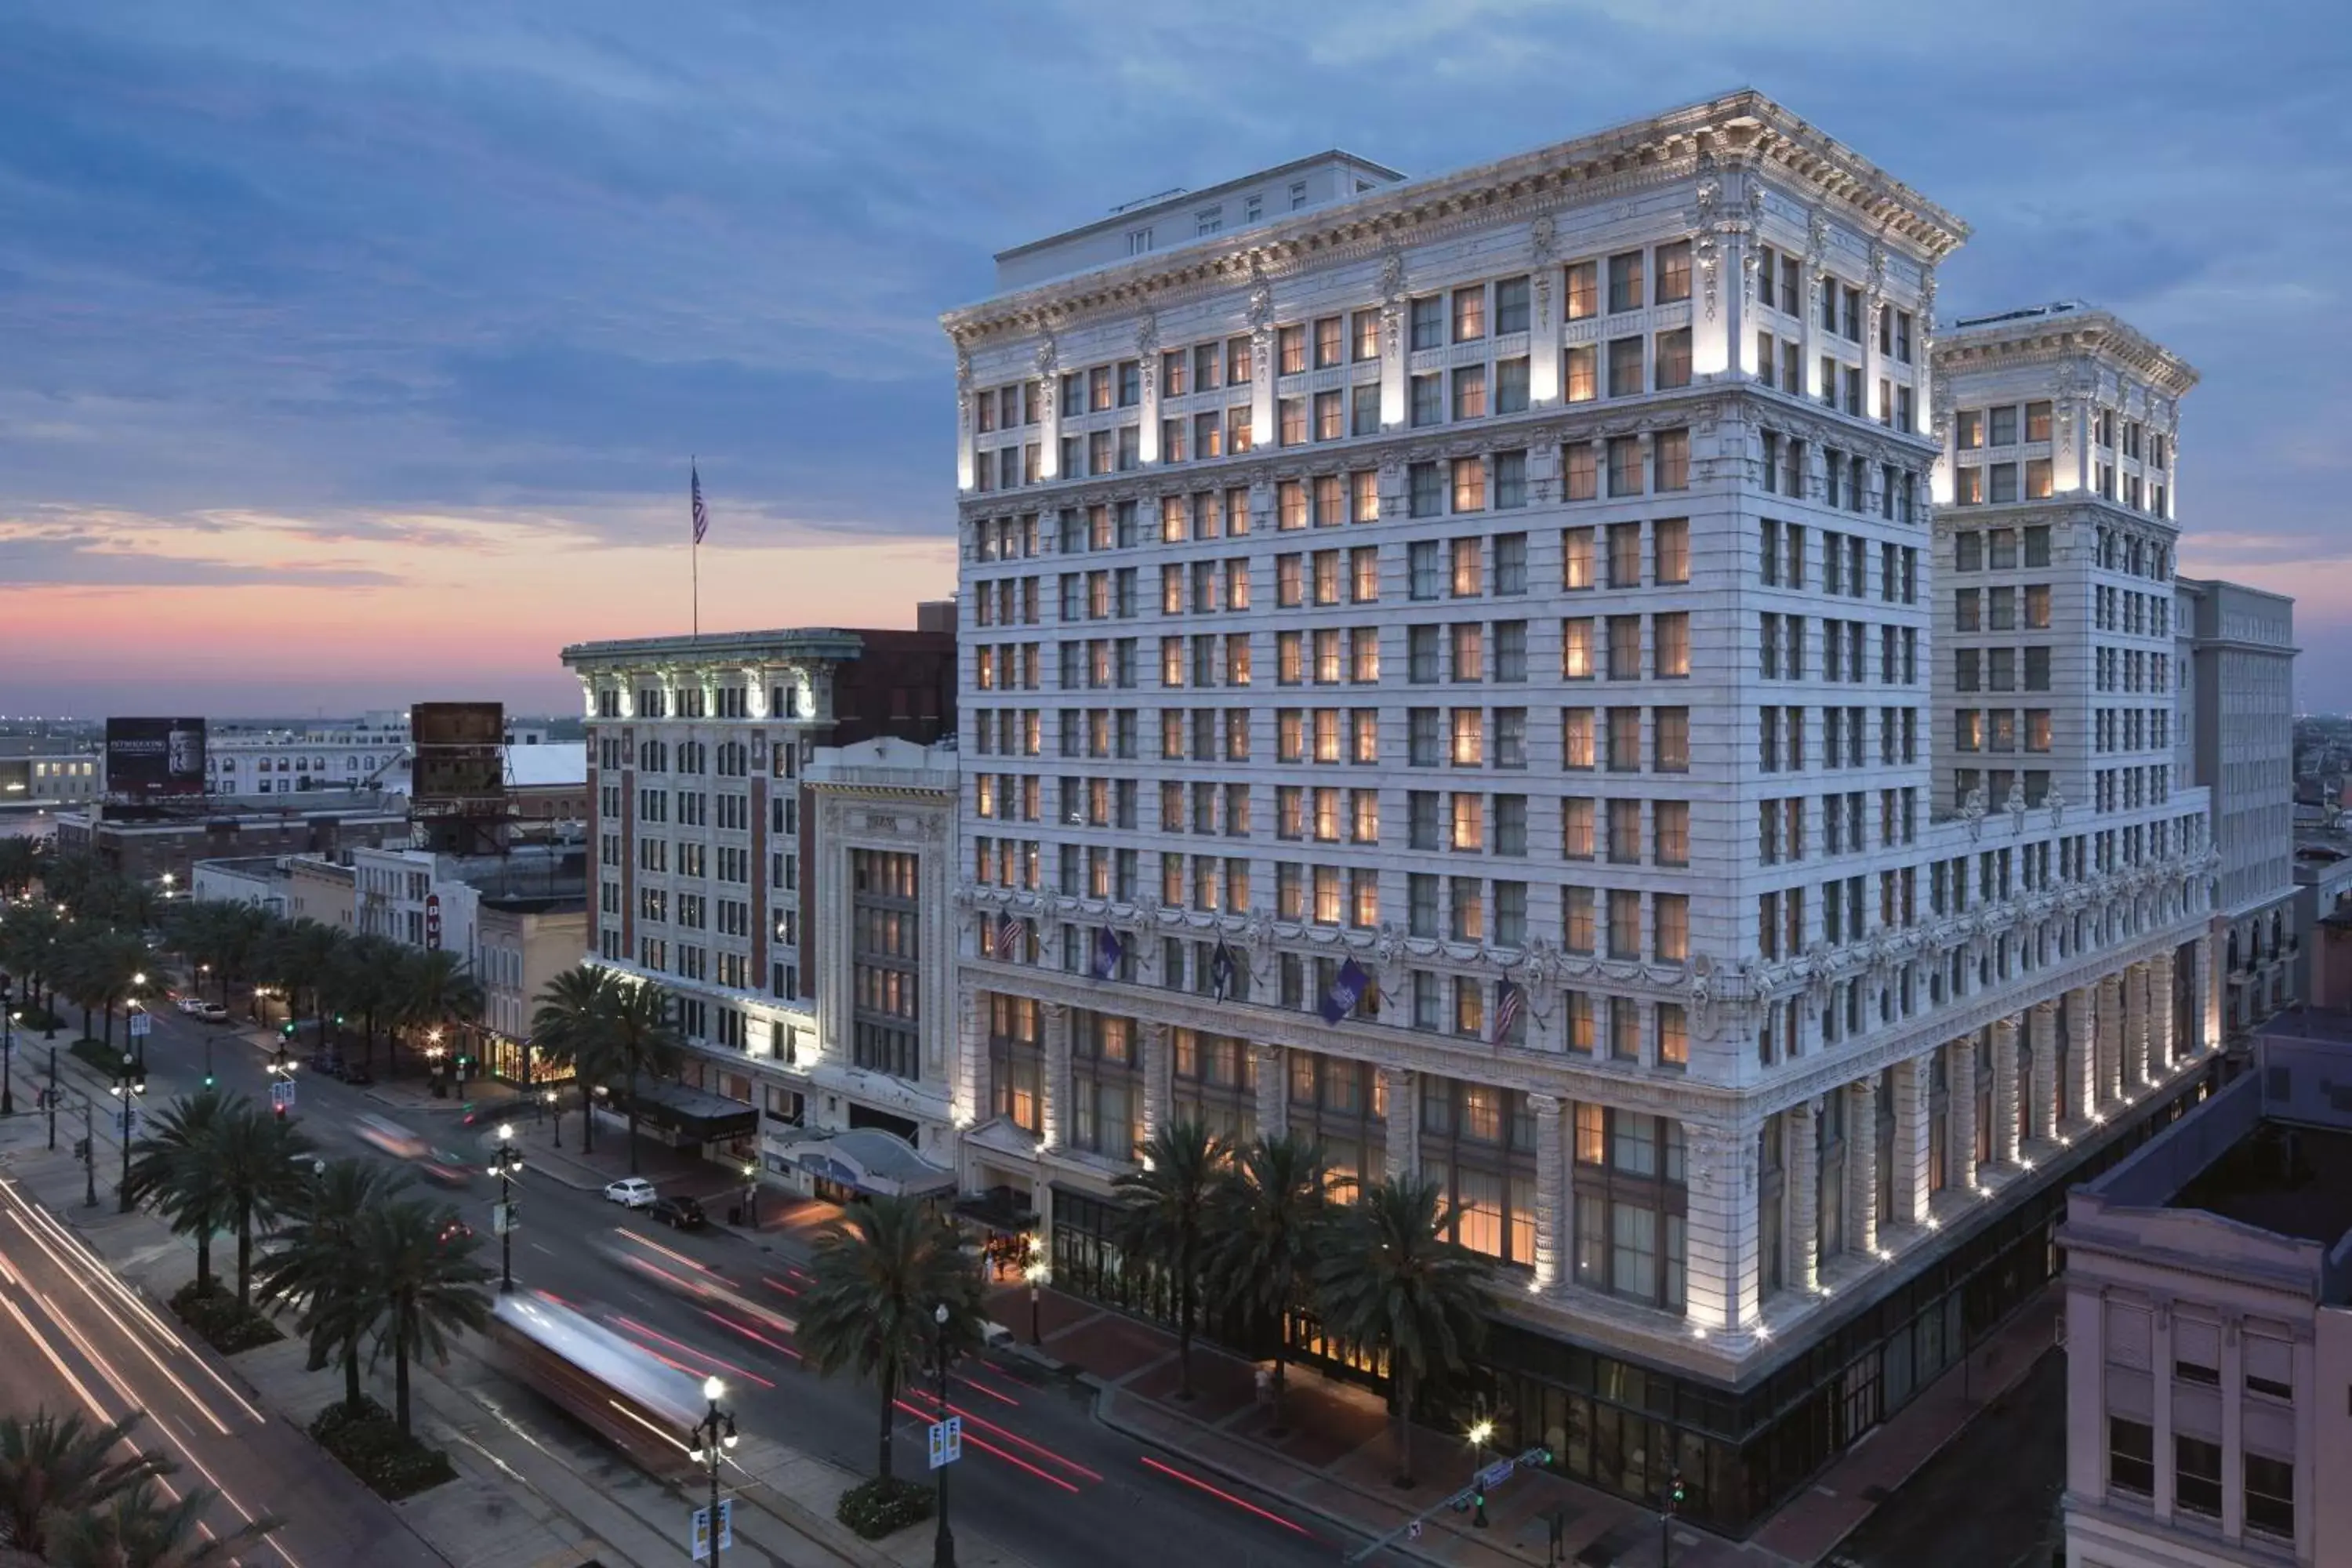 Property building in The Ritz-Carlton, New Orleans